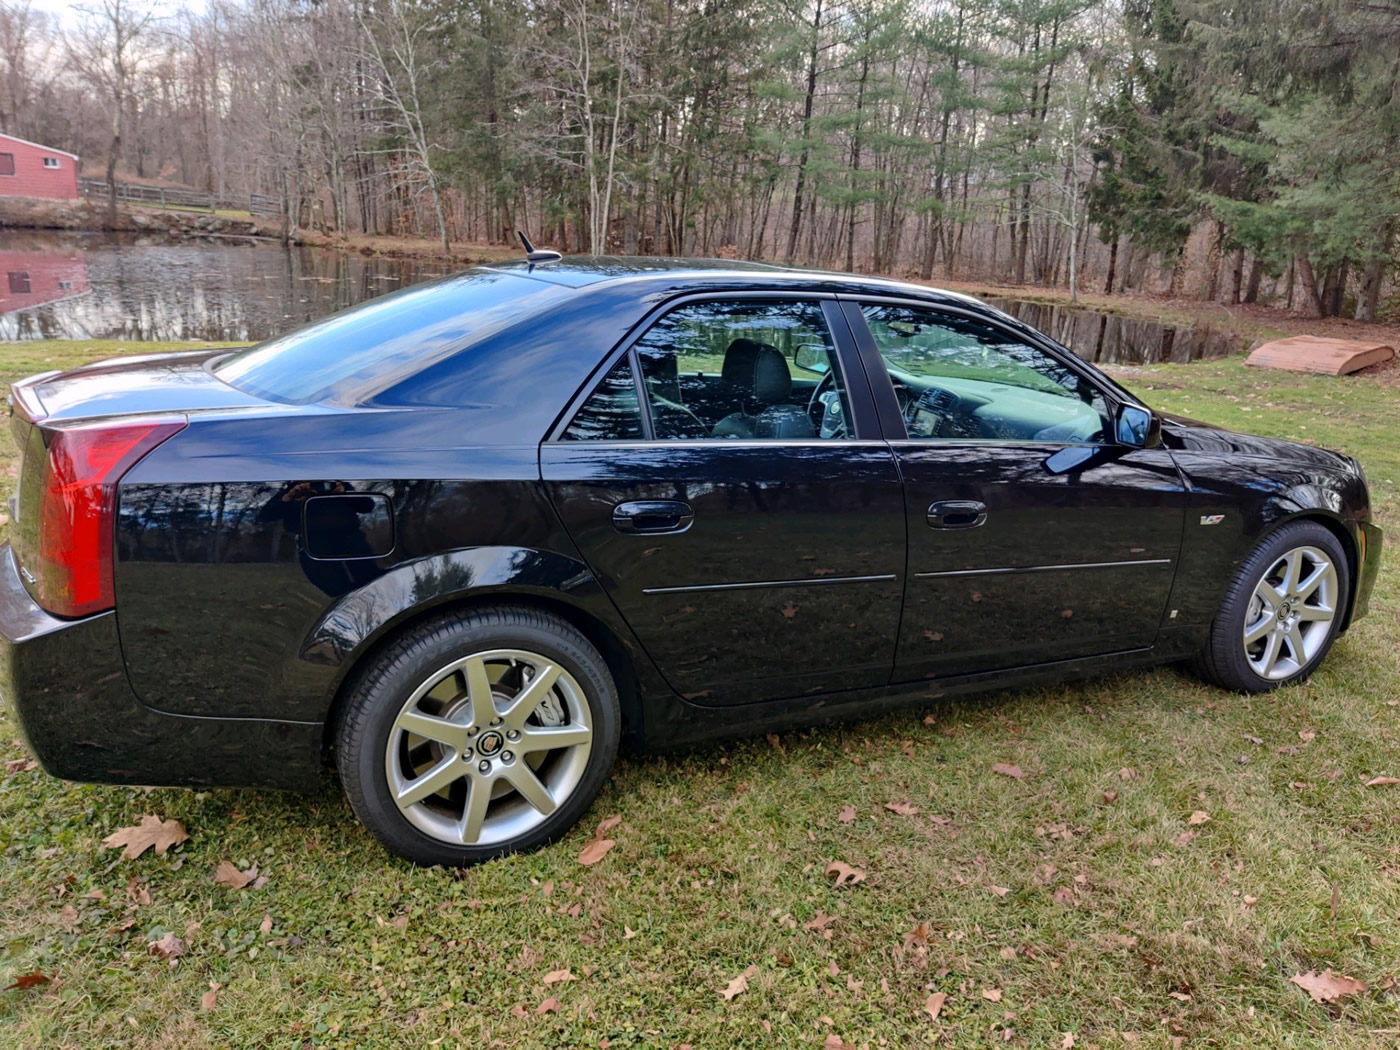 2007 Cadillac CTS-V 6-Speed in Black Raven